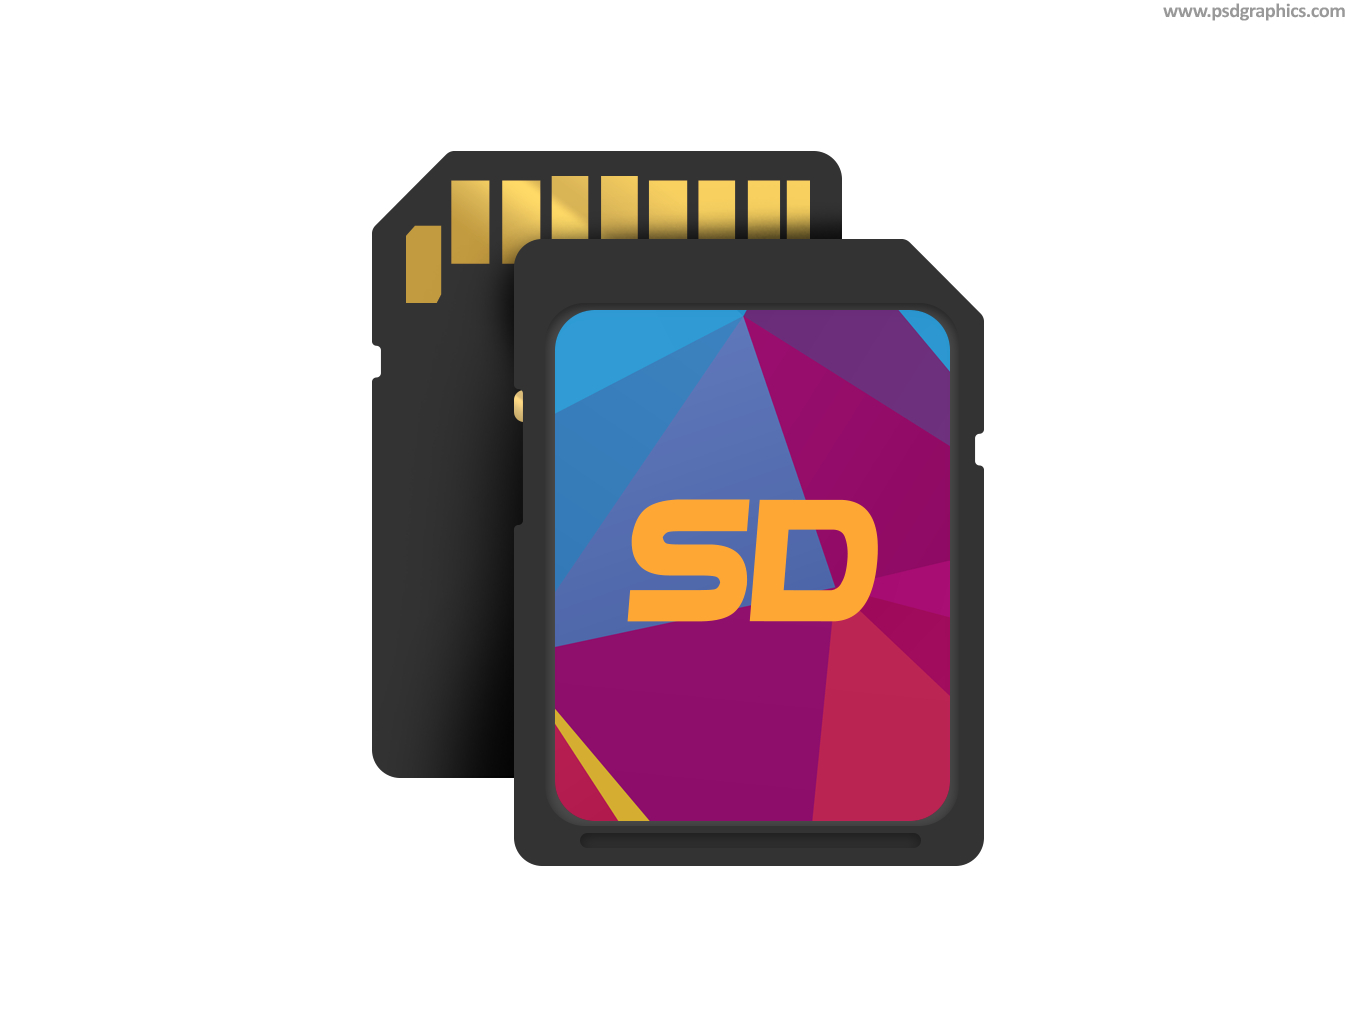 Sd Memory Card Icon Psd | Psdgraphics Throughout In Memory Cards Templates